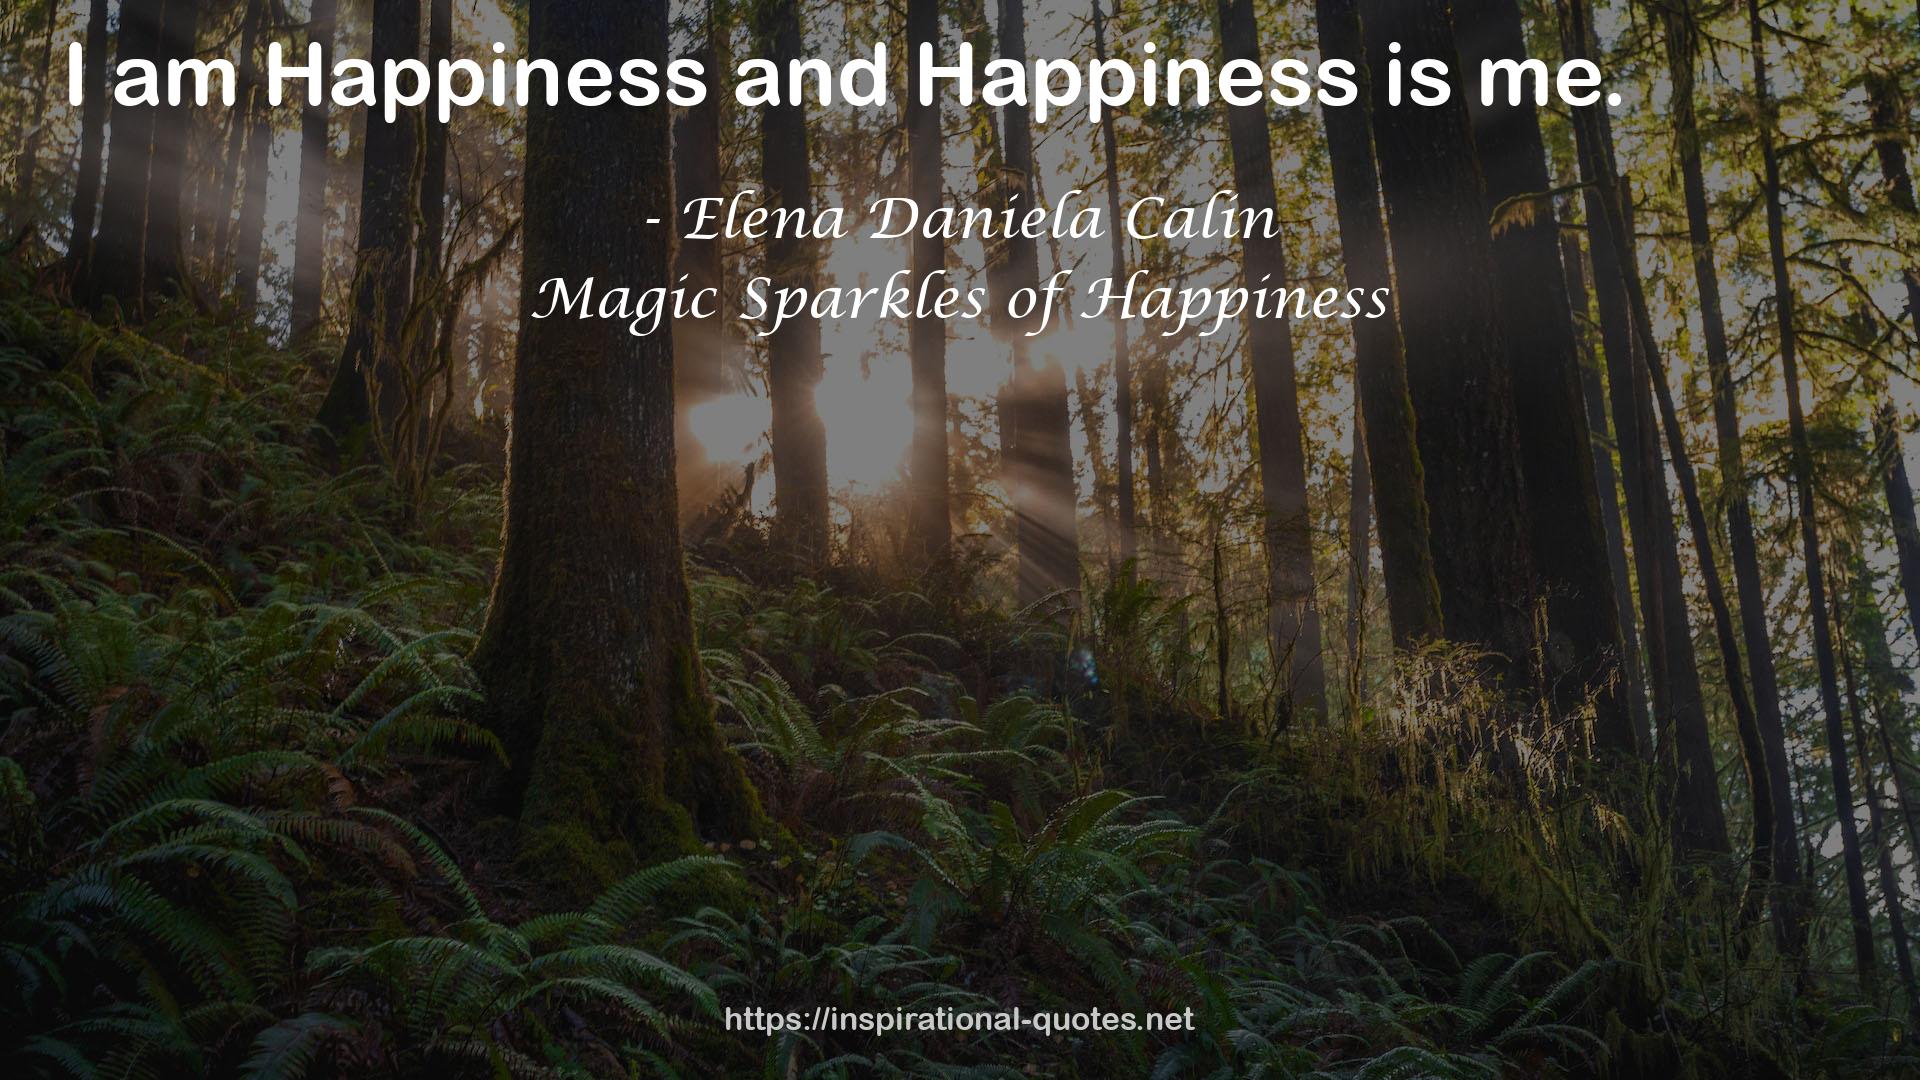 Magic Sparkles of Happiness QUOTES